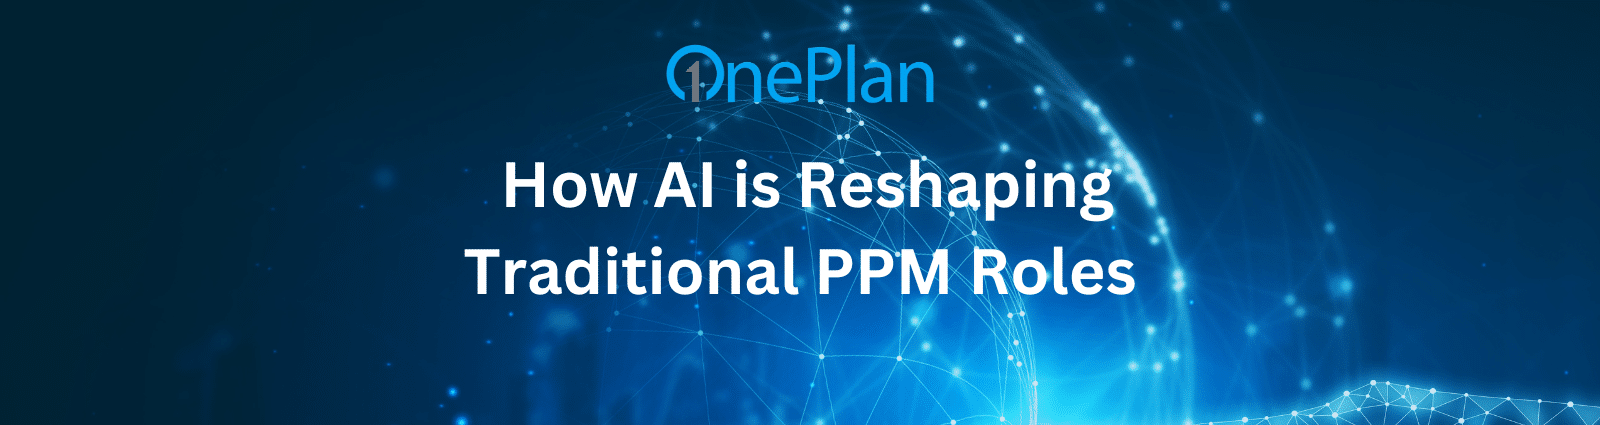 How AI Reshaping Traditional PPM Roles